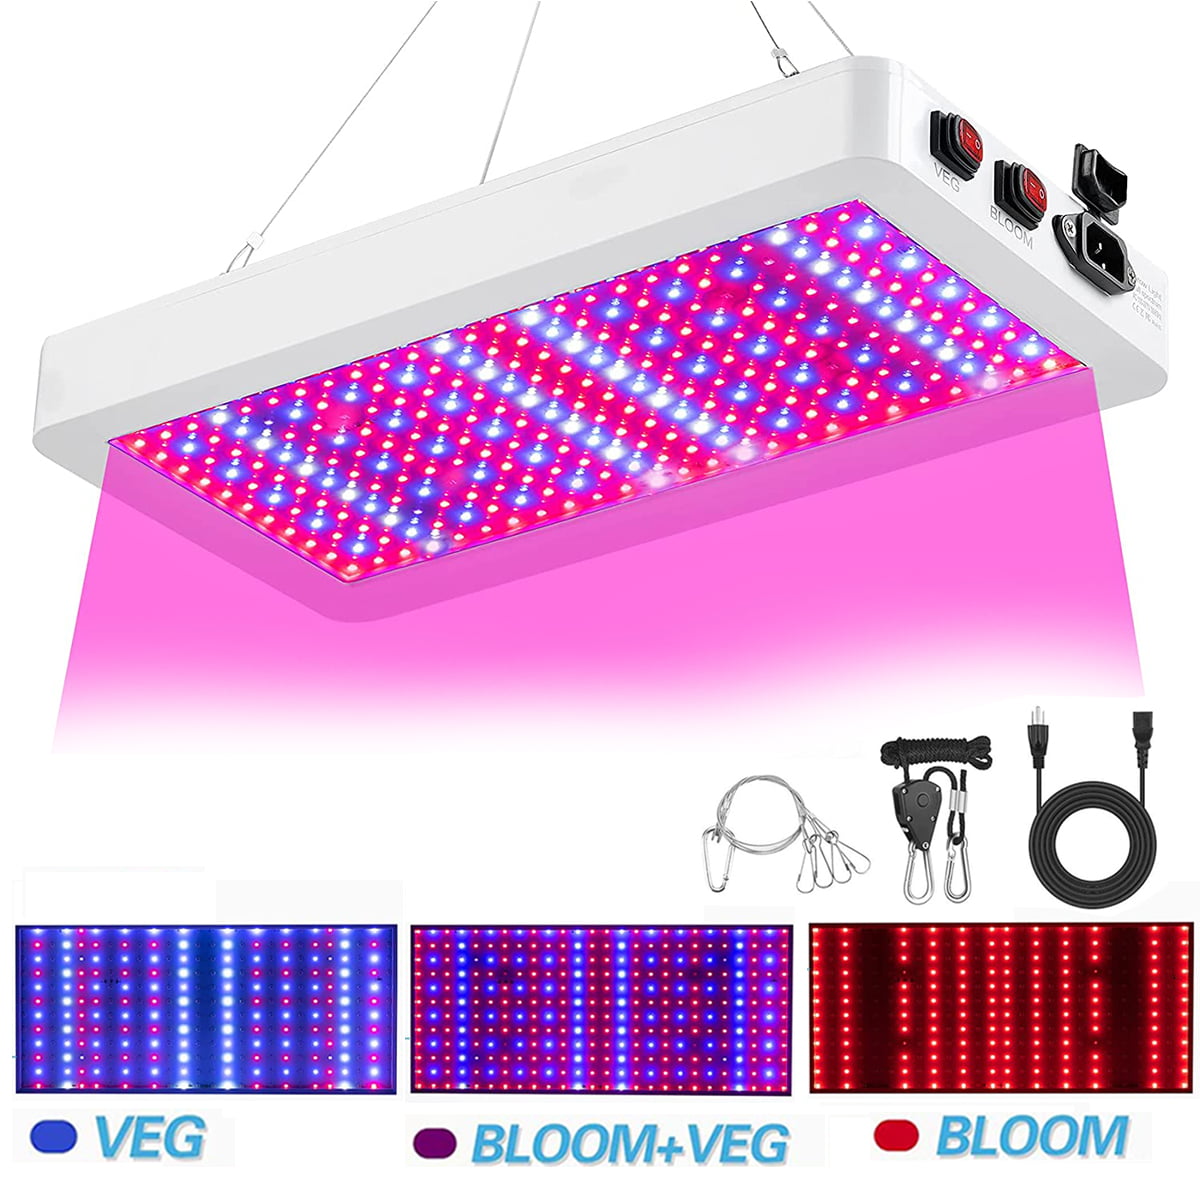 100W 204LED Plant Growing Light Full Spectrums Flower Grow Lamp Remote Control 